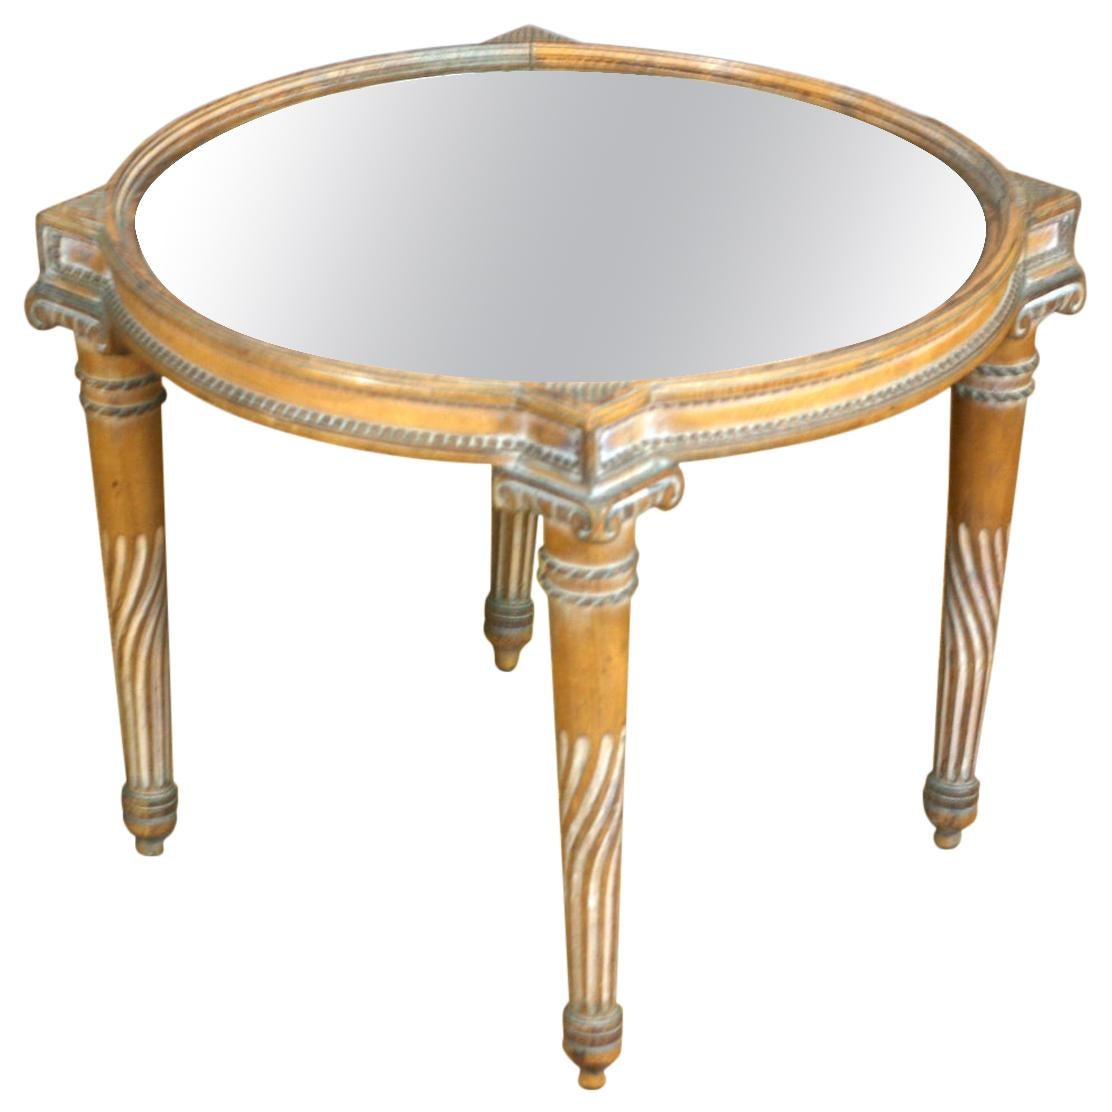 Neoclassical Revival Mirrored Table For Sale